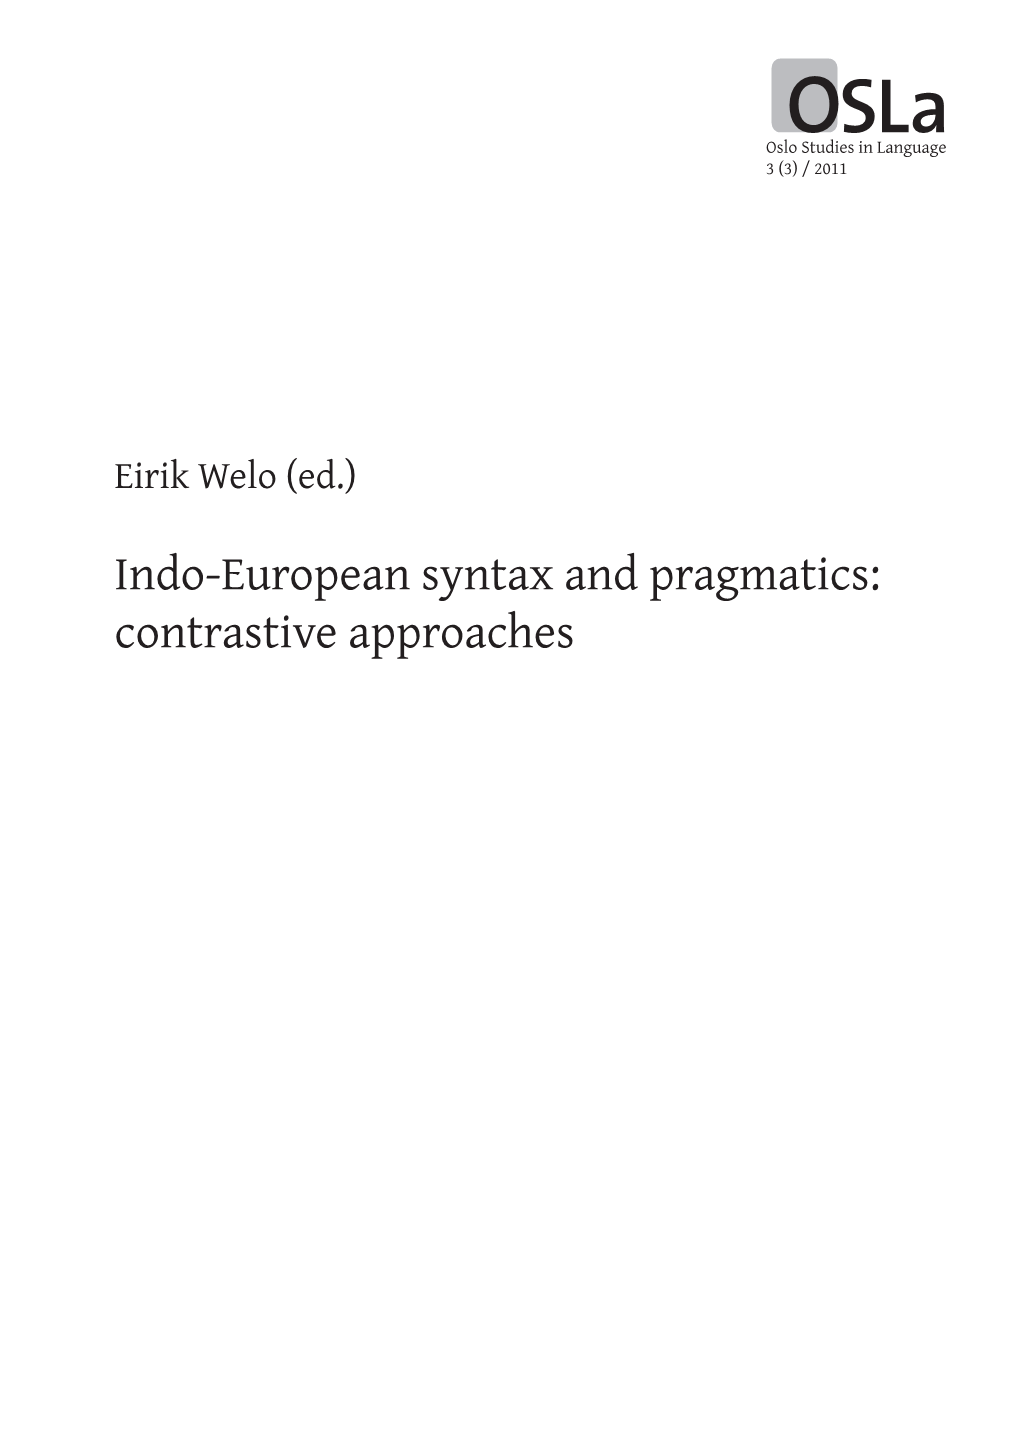 Indo-European Syntax and Pragmatics: Contrastive Approaches Oslo Studies in Language, 3(3), 2011